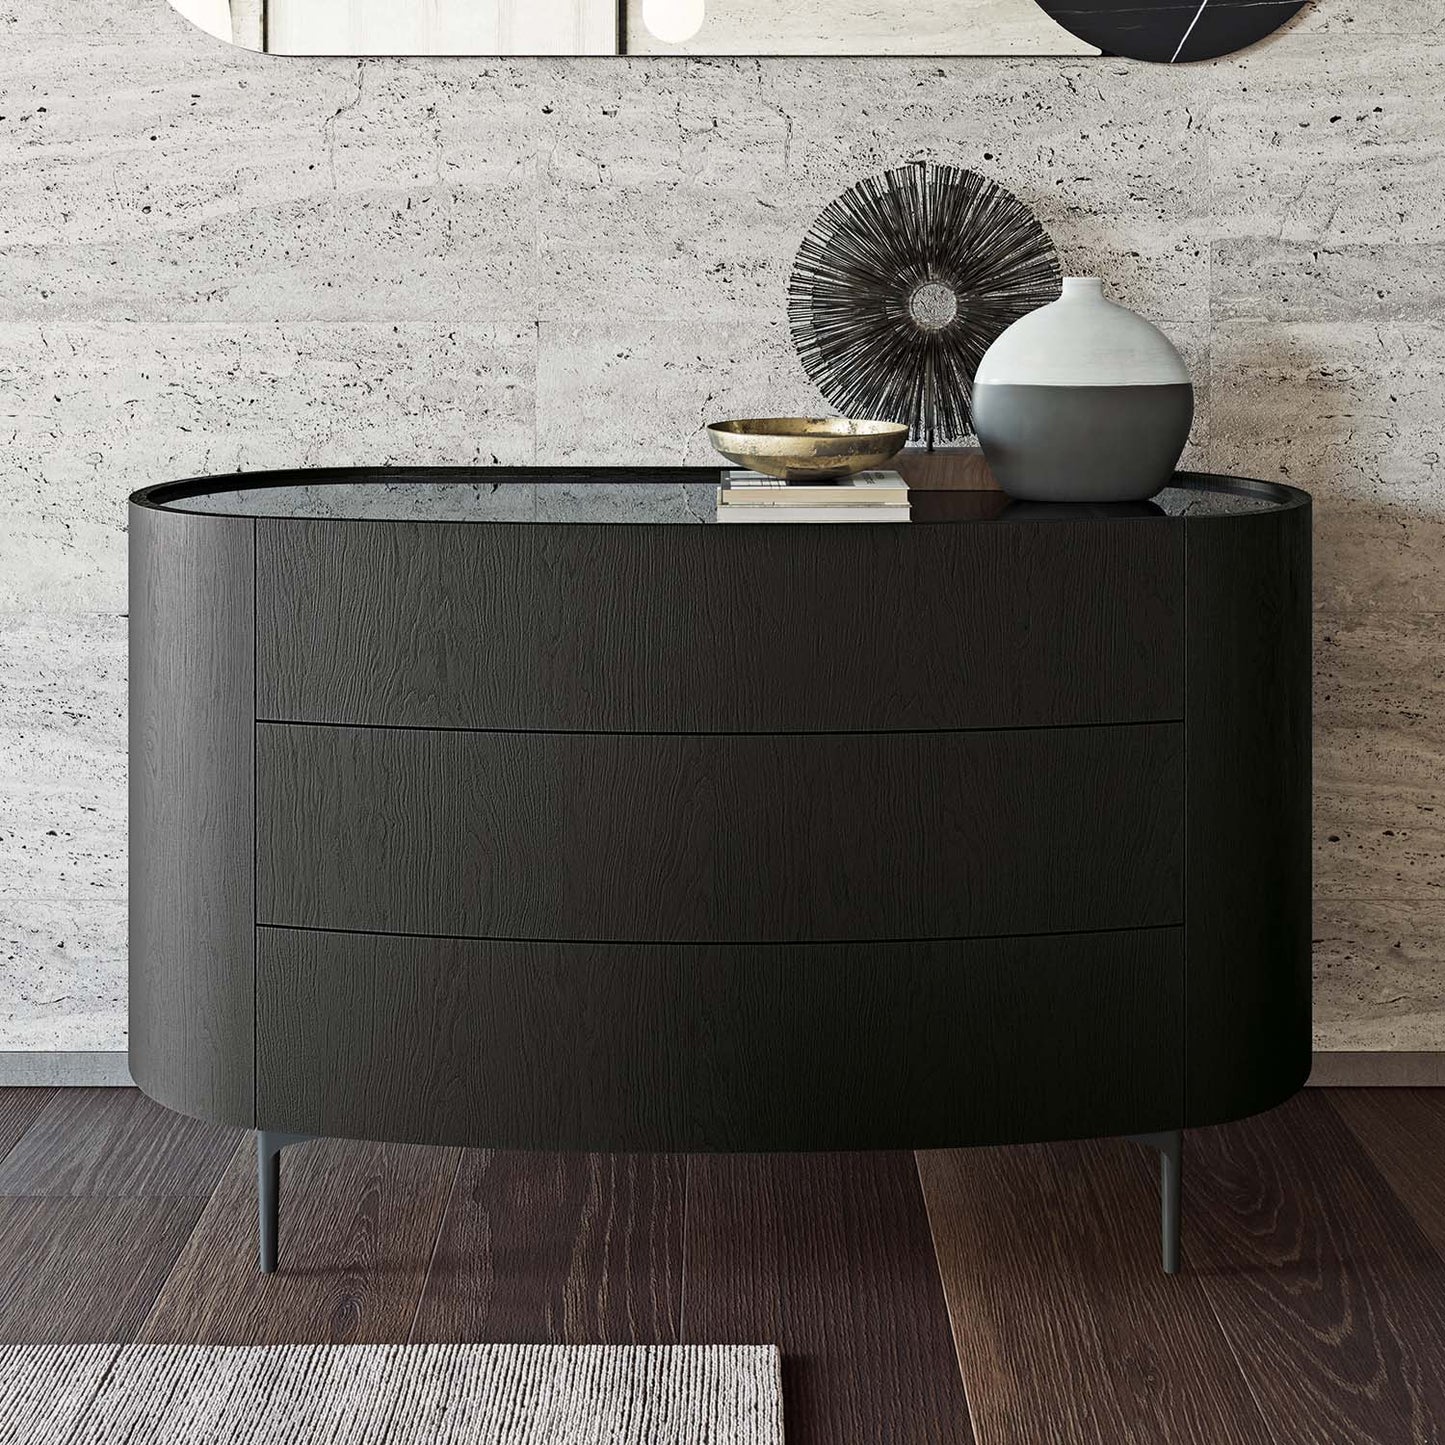 Ronda chest of drawers by Dall'Agnese